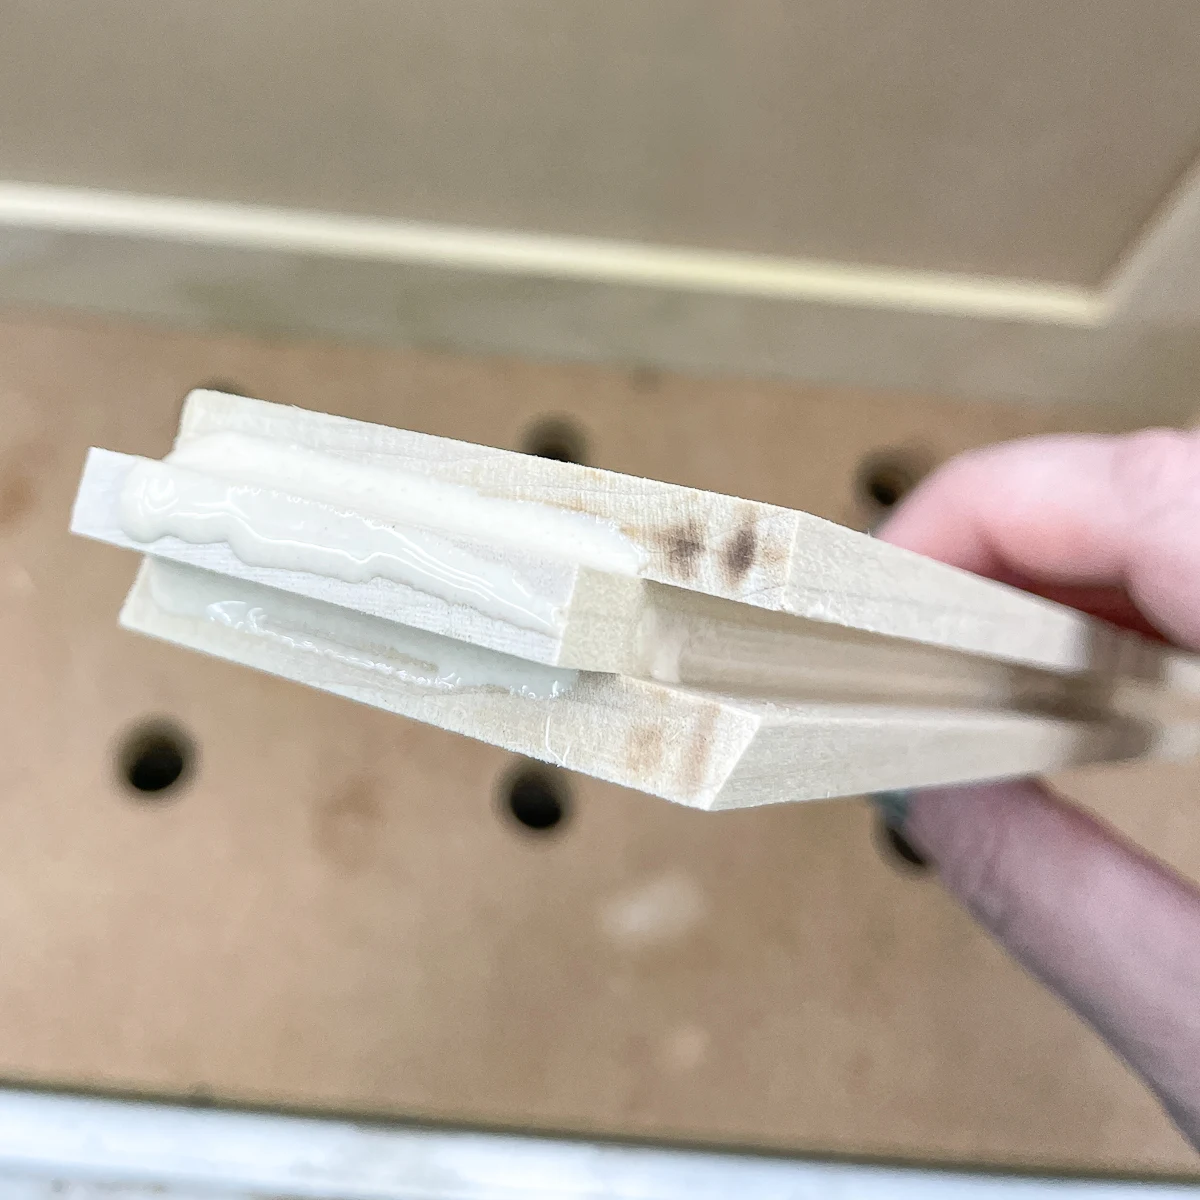 wood glue on ends of rail pieces